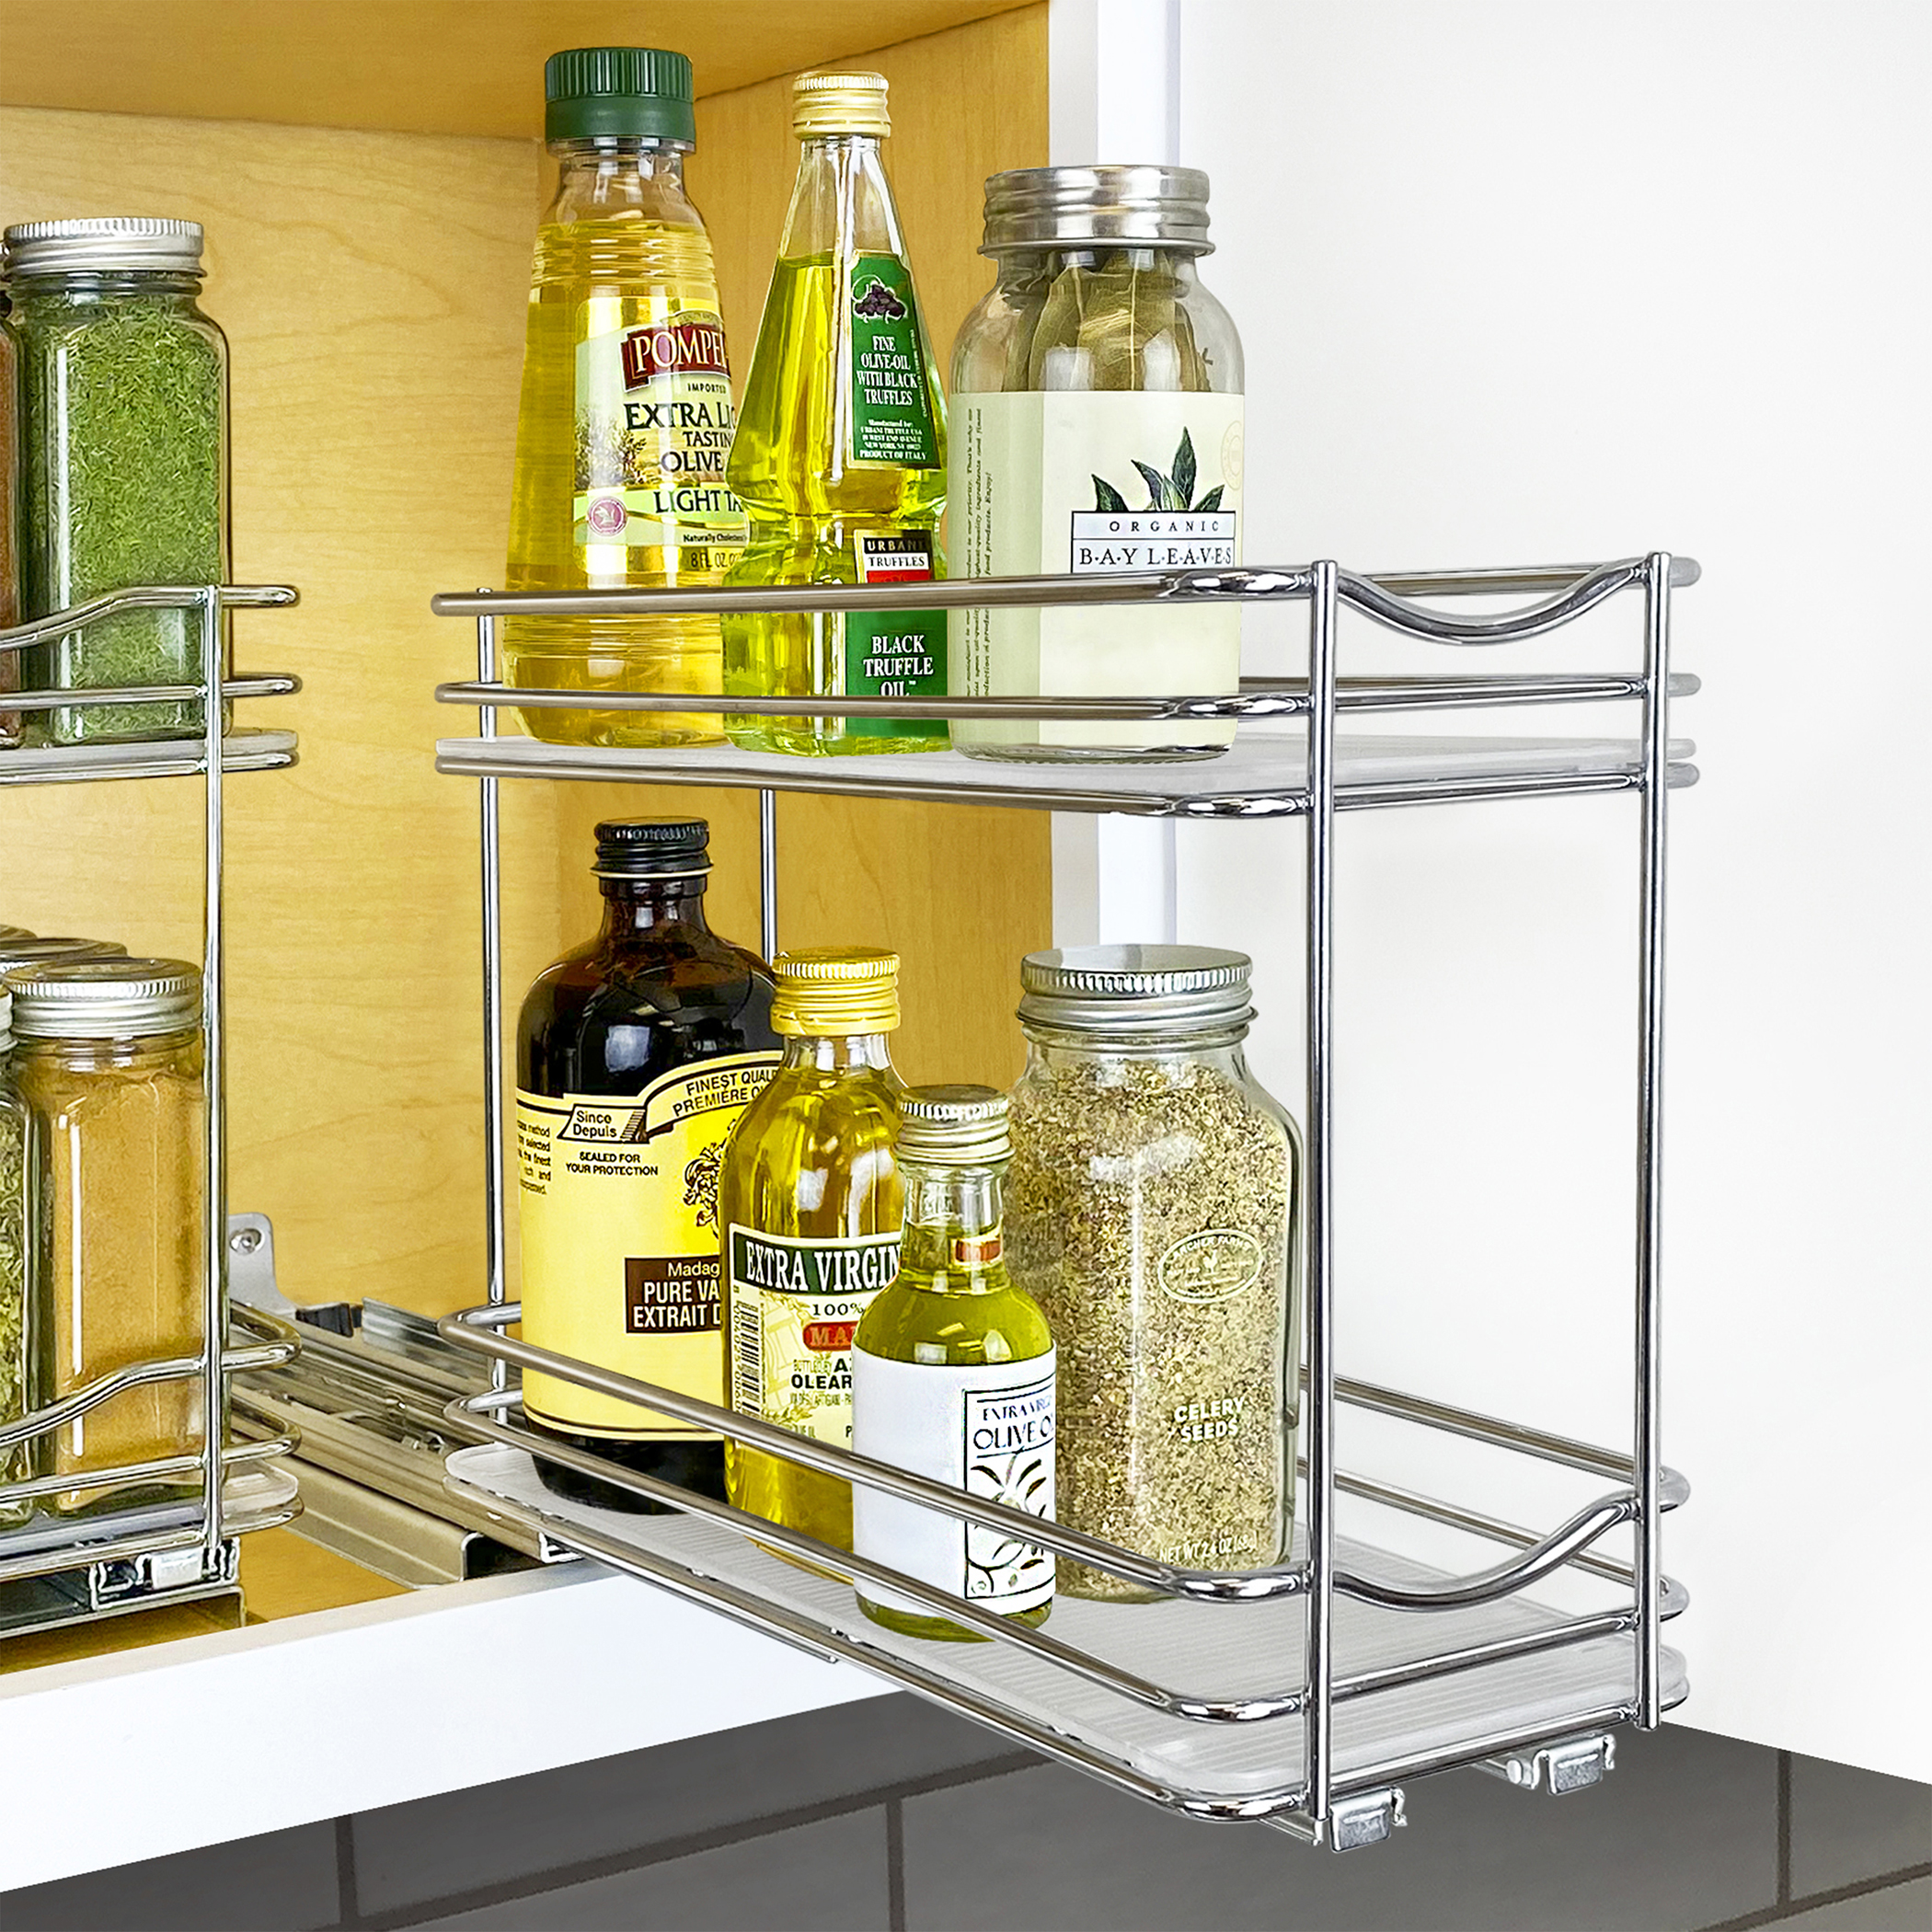 https://www.lynkinc.com/wp-content/uploads/2018/02/Lynk-430422DS_4-PROFESSIONAL-Roll-Out-Spice-Drawer-2-Tier-2.jpg